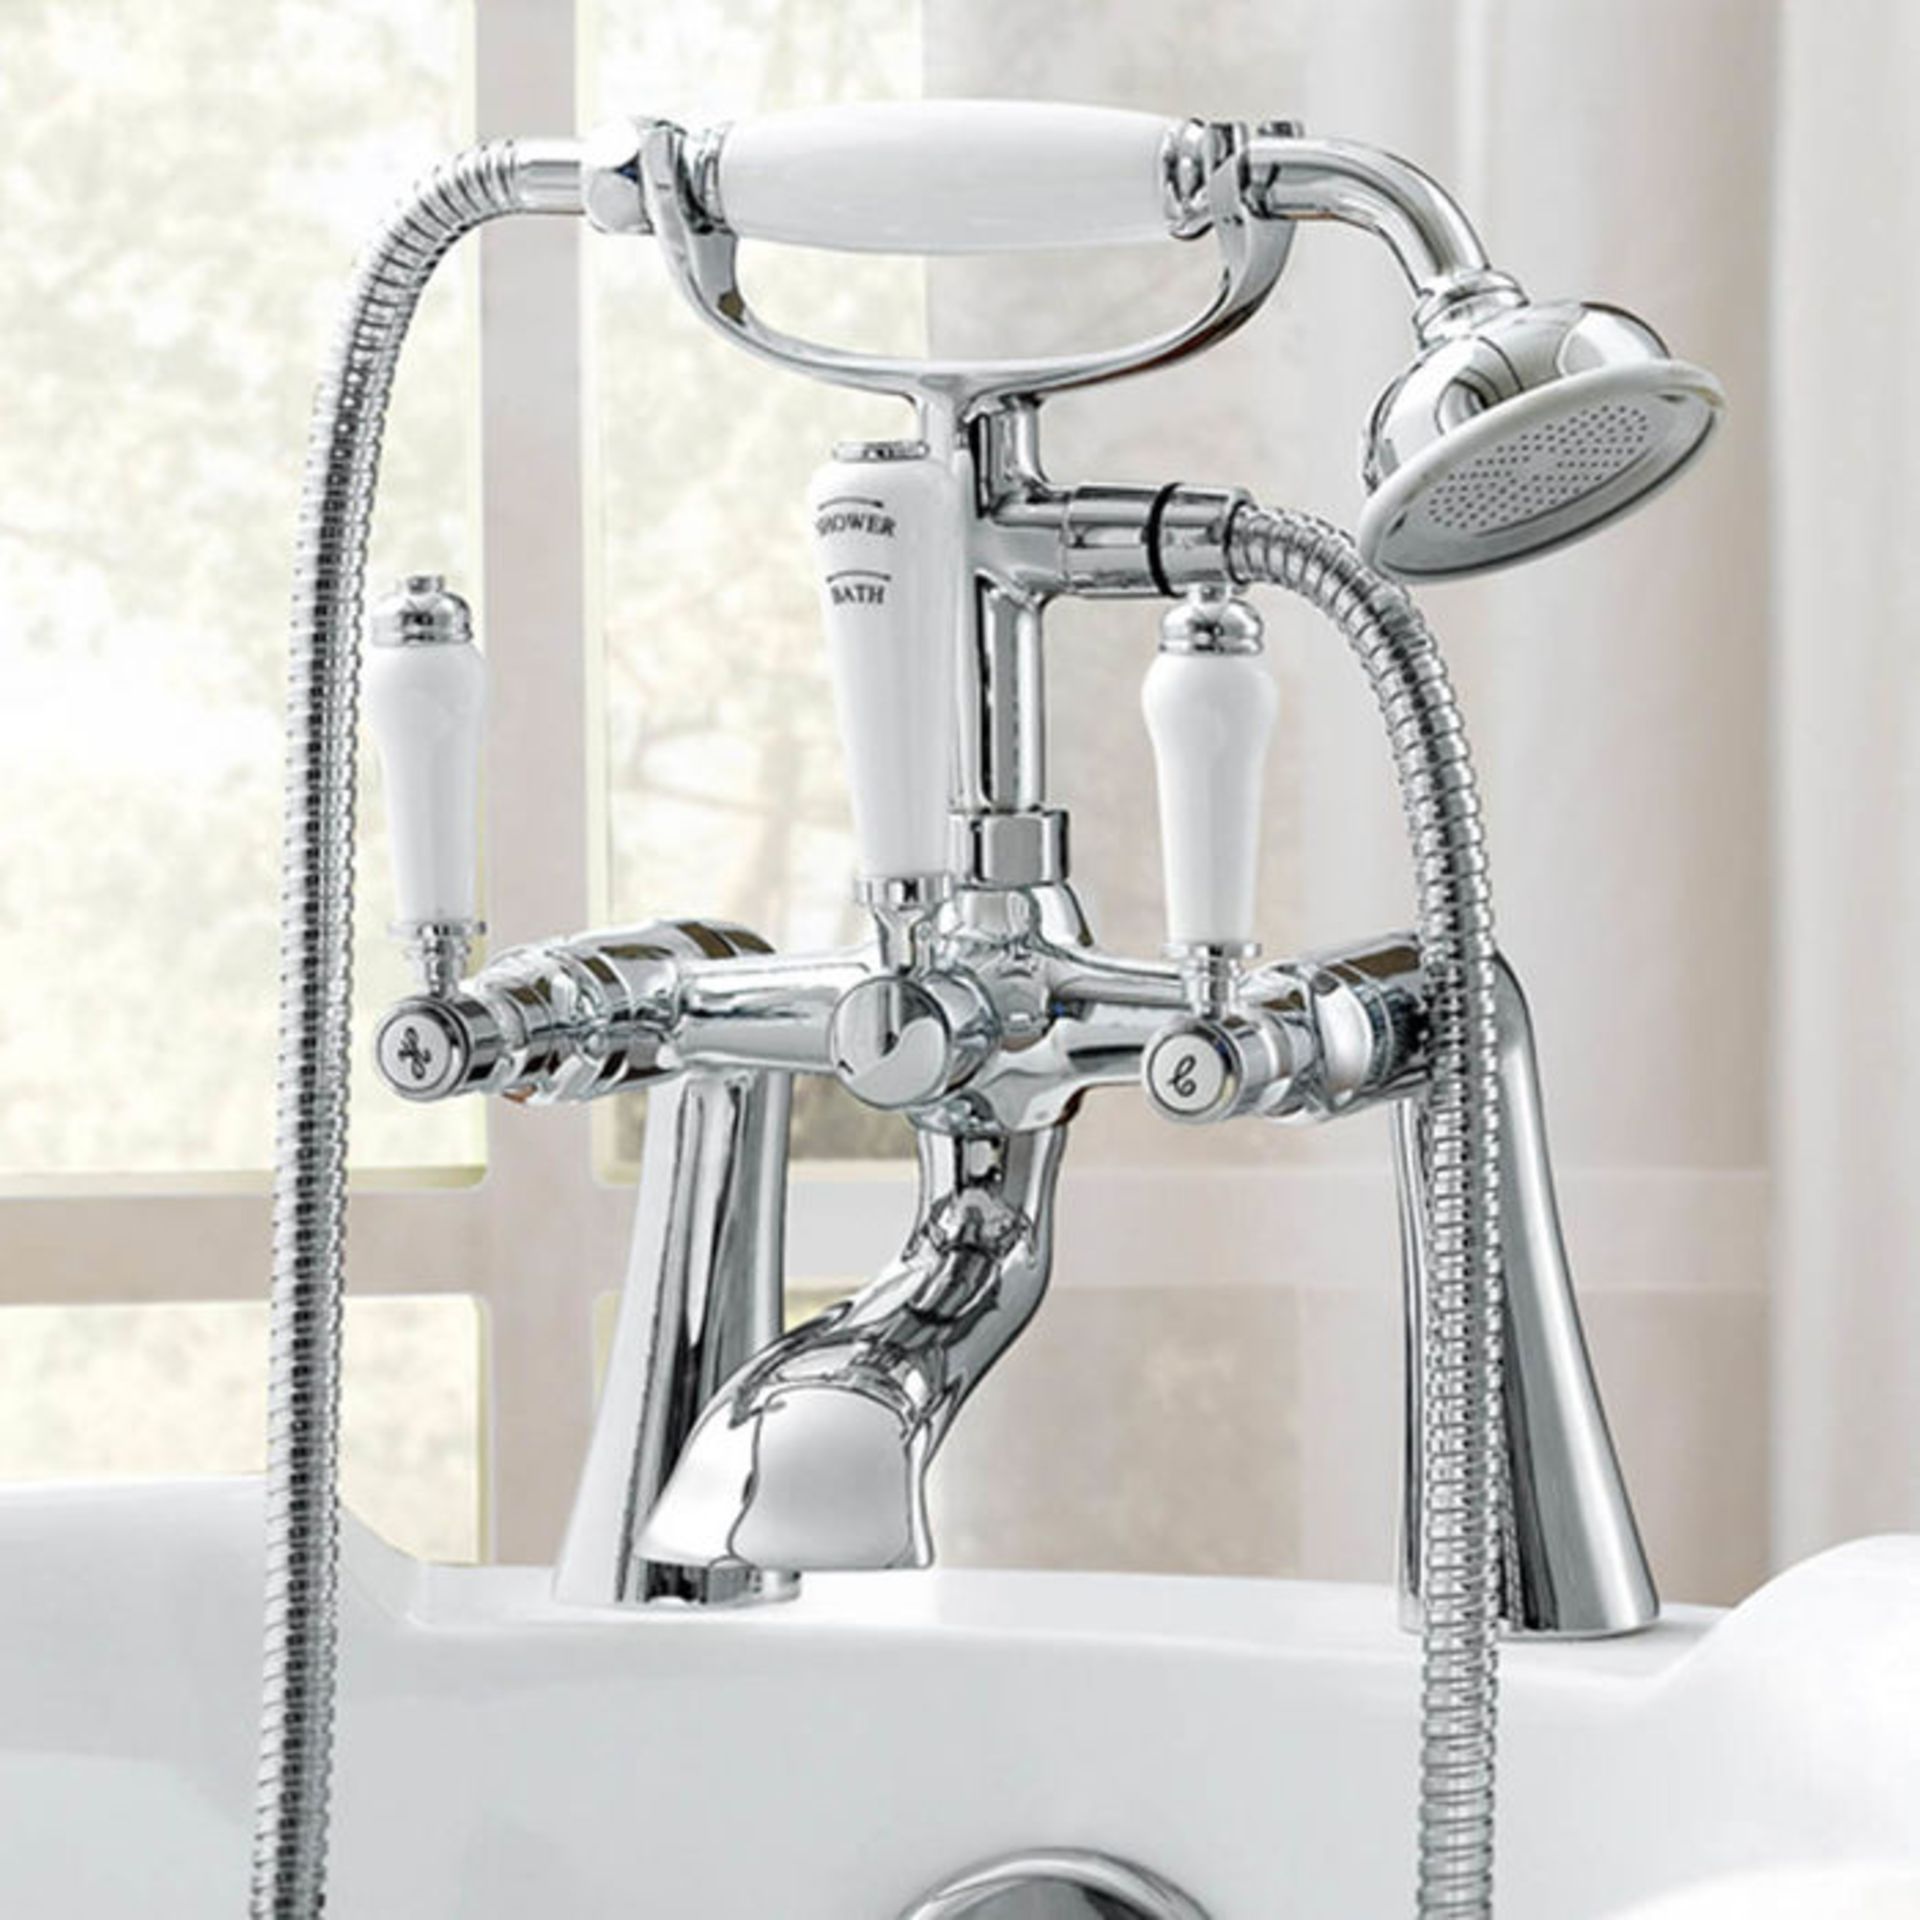 (PA39) Regal Chrome Traditional Bath Mixer Lever Tap with Hand Held Shower Chrome Plated Solid Brass - Image 3 of 5